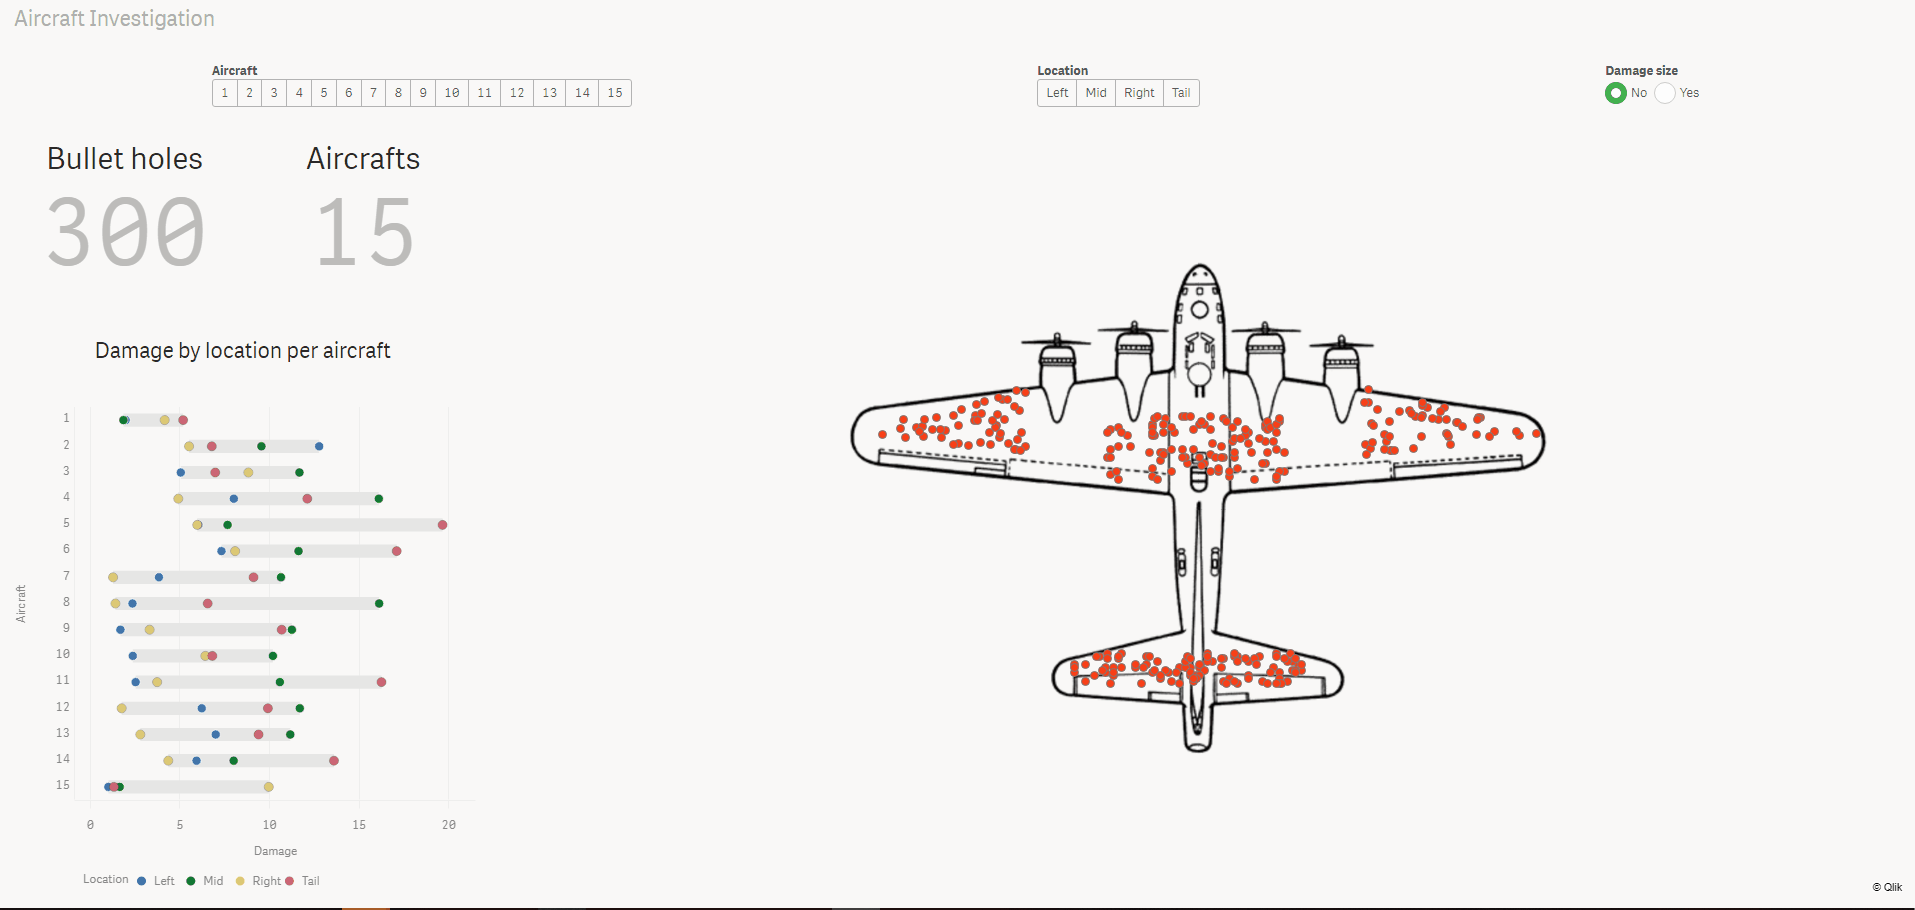 aviation - Does the survivorship bias airplane diagram come from